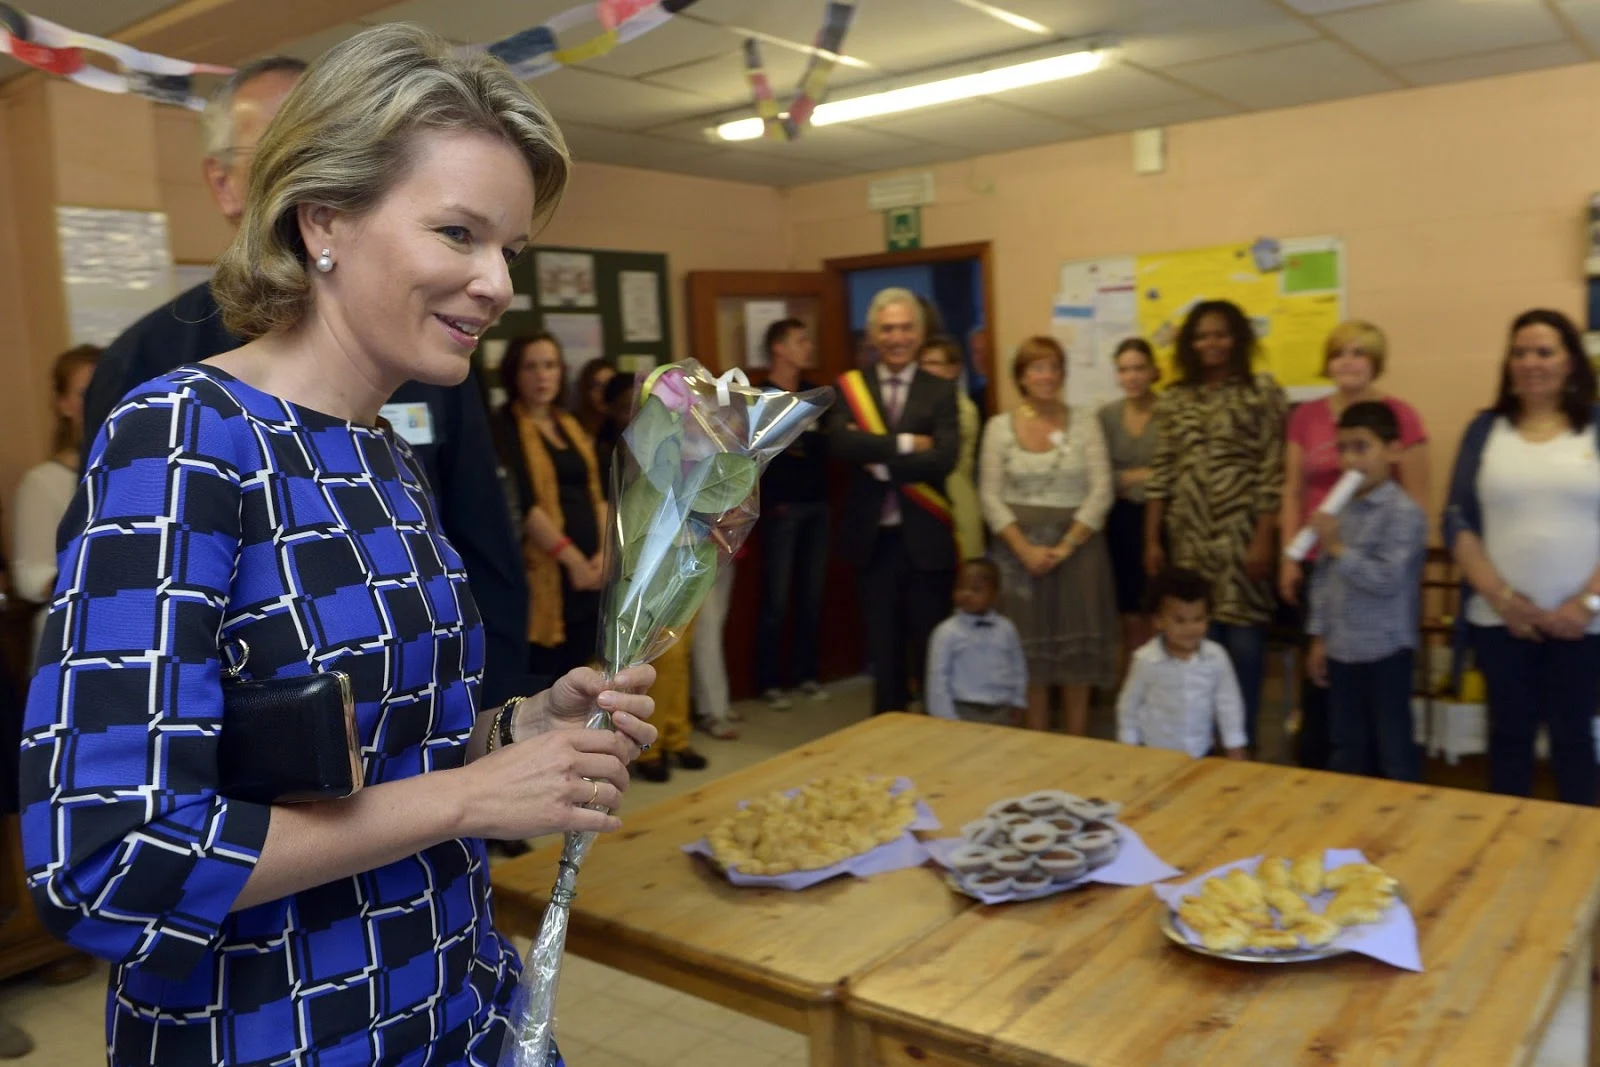 Queen Mathilde also took the time to speak with the people this work is all about, the people in need of the work of these institutions.